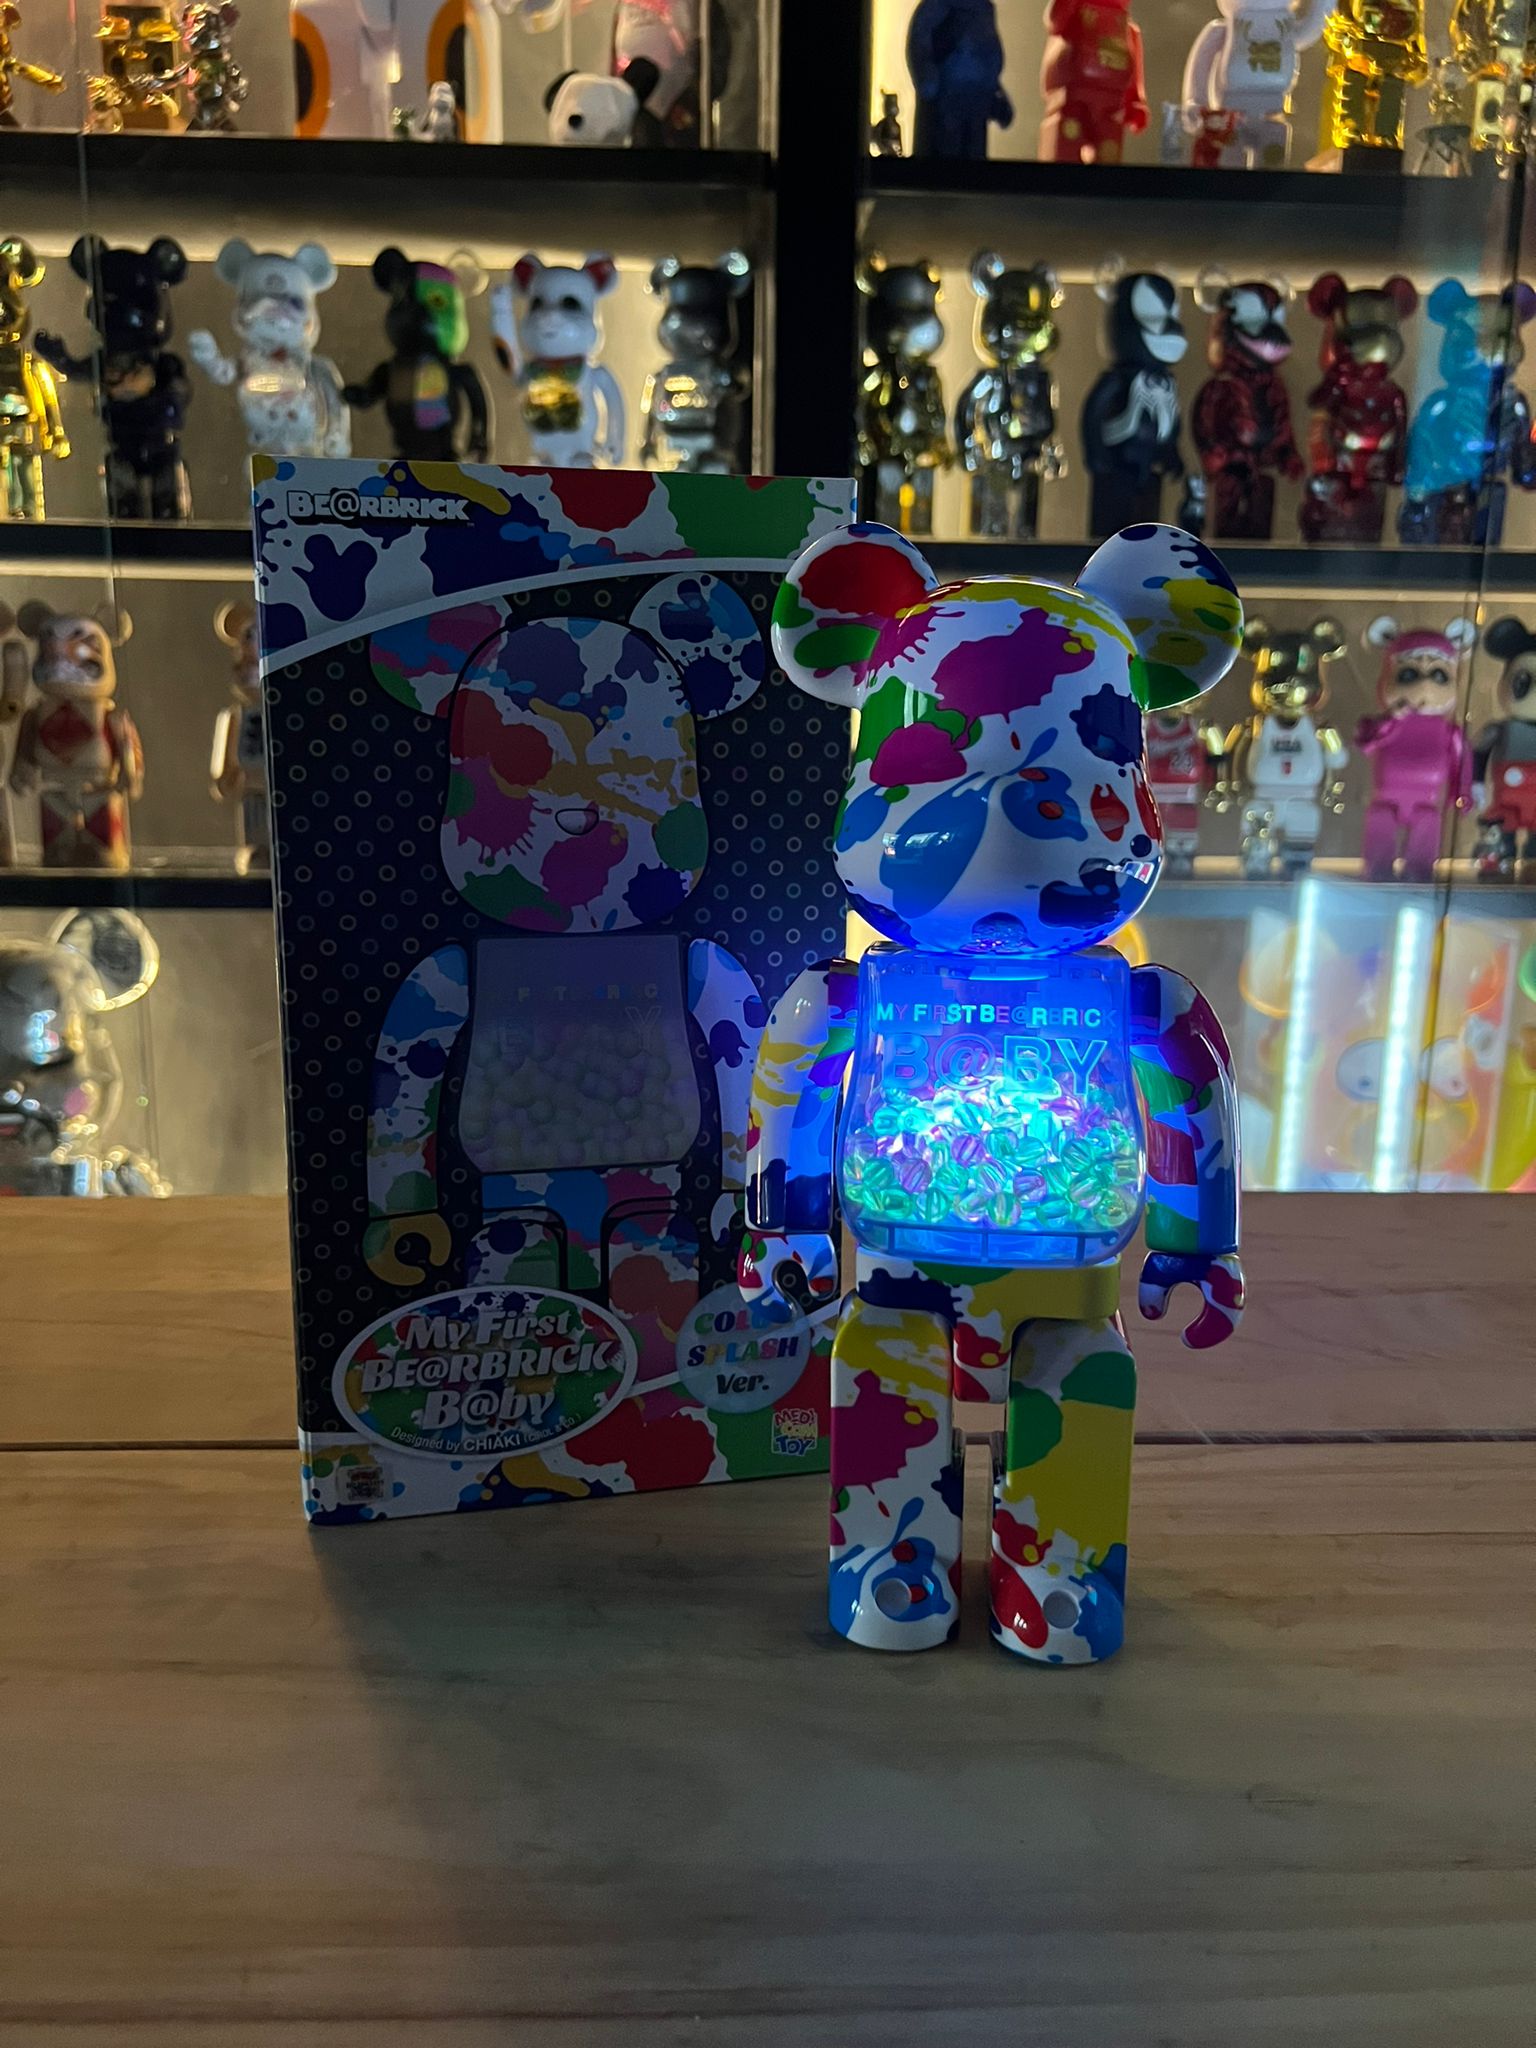 MY FIRST BE@RBRICK B@BY COLOR SPLASH - フィギュア